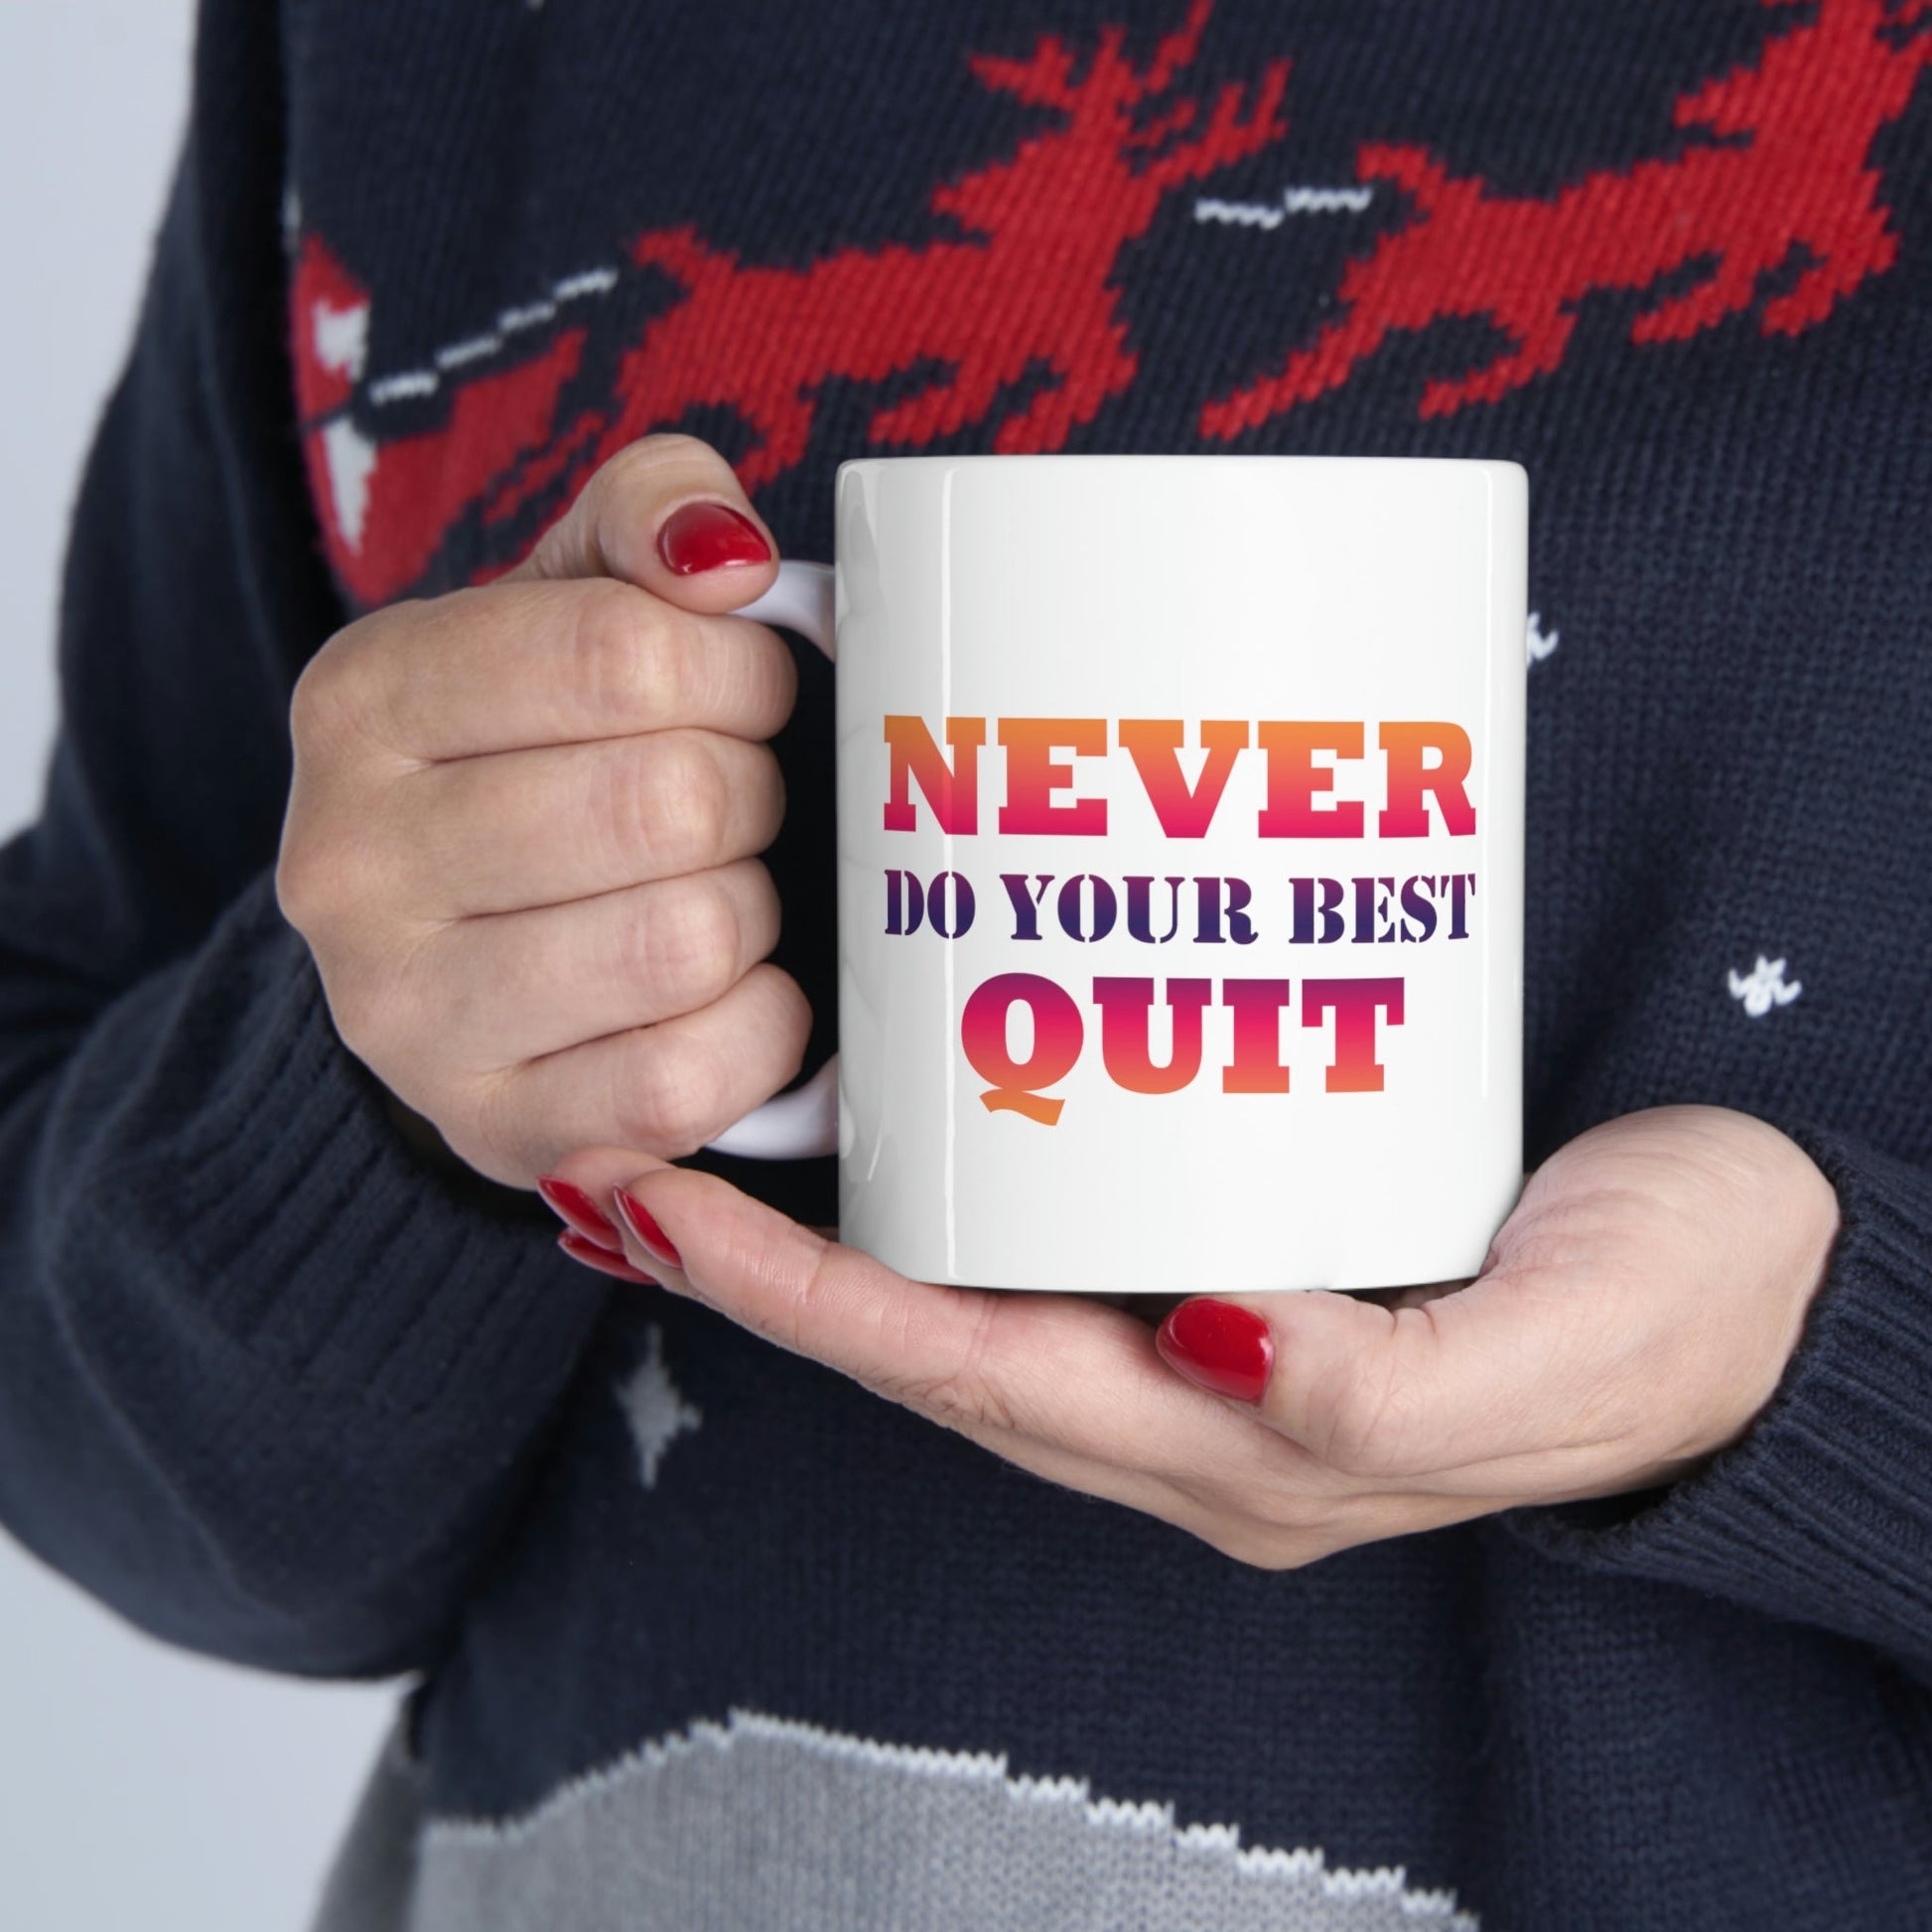 Never Do Your Best Quit Motivation Quotes Ceramic Mug 11oz Ichaku [Perfect Gifts Selection]